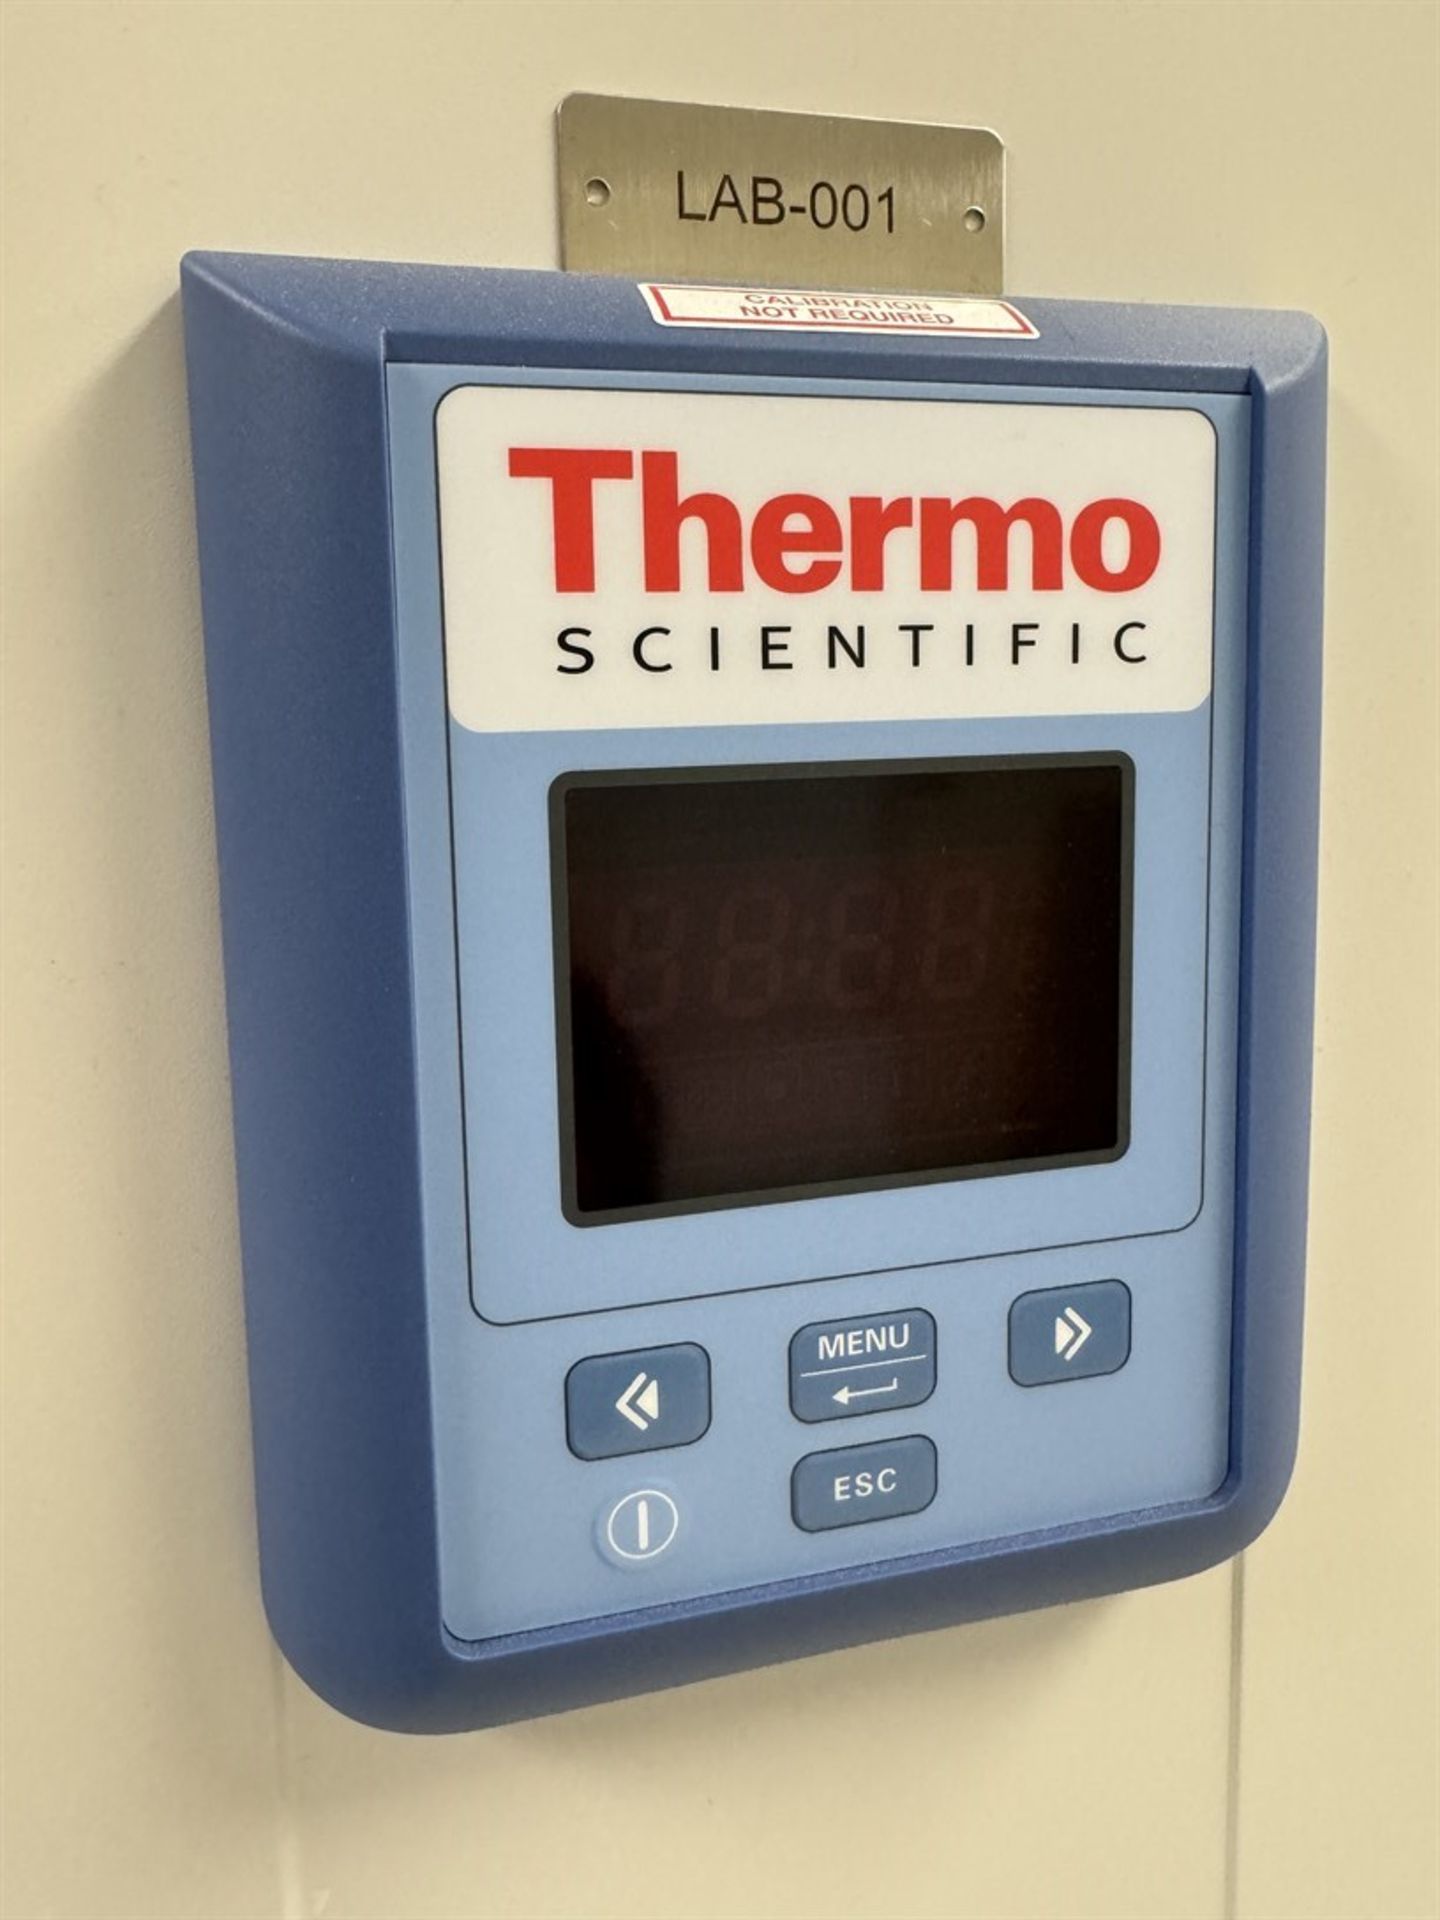 2014 THERMO SCIENTIFIC Heratherm IGS750 Incubator, s/n 41623840 - Image 4 of 8